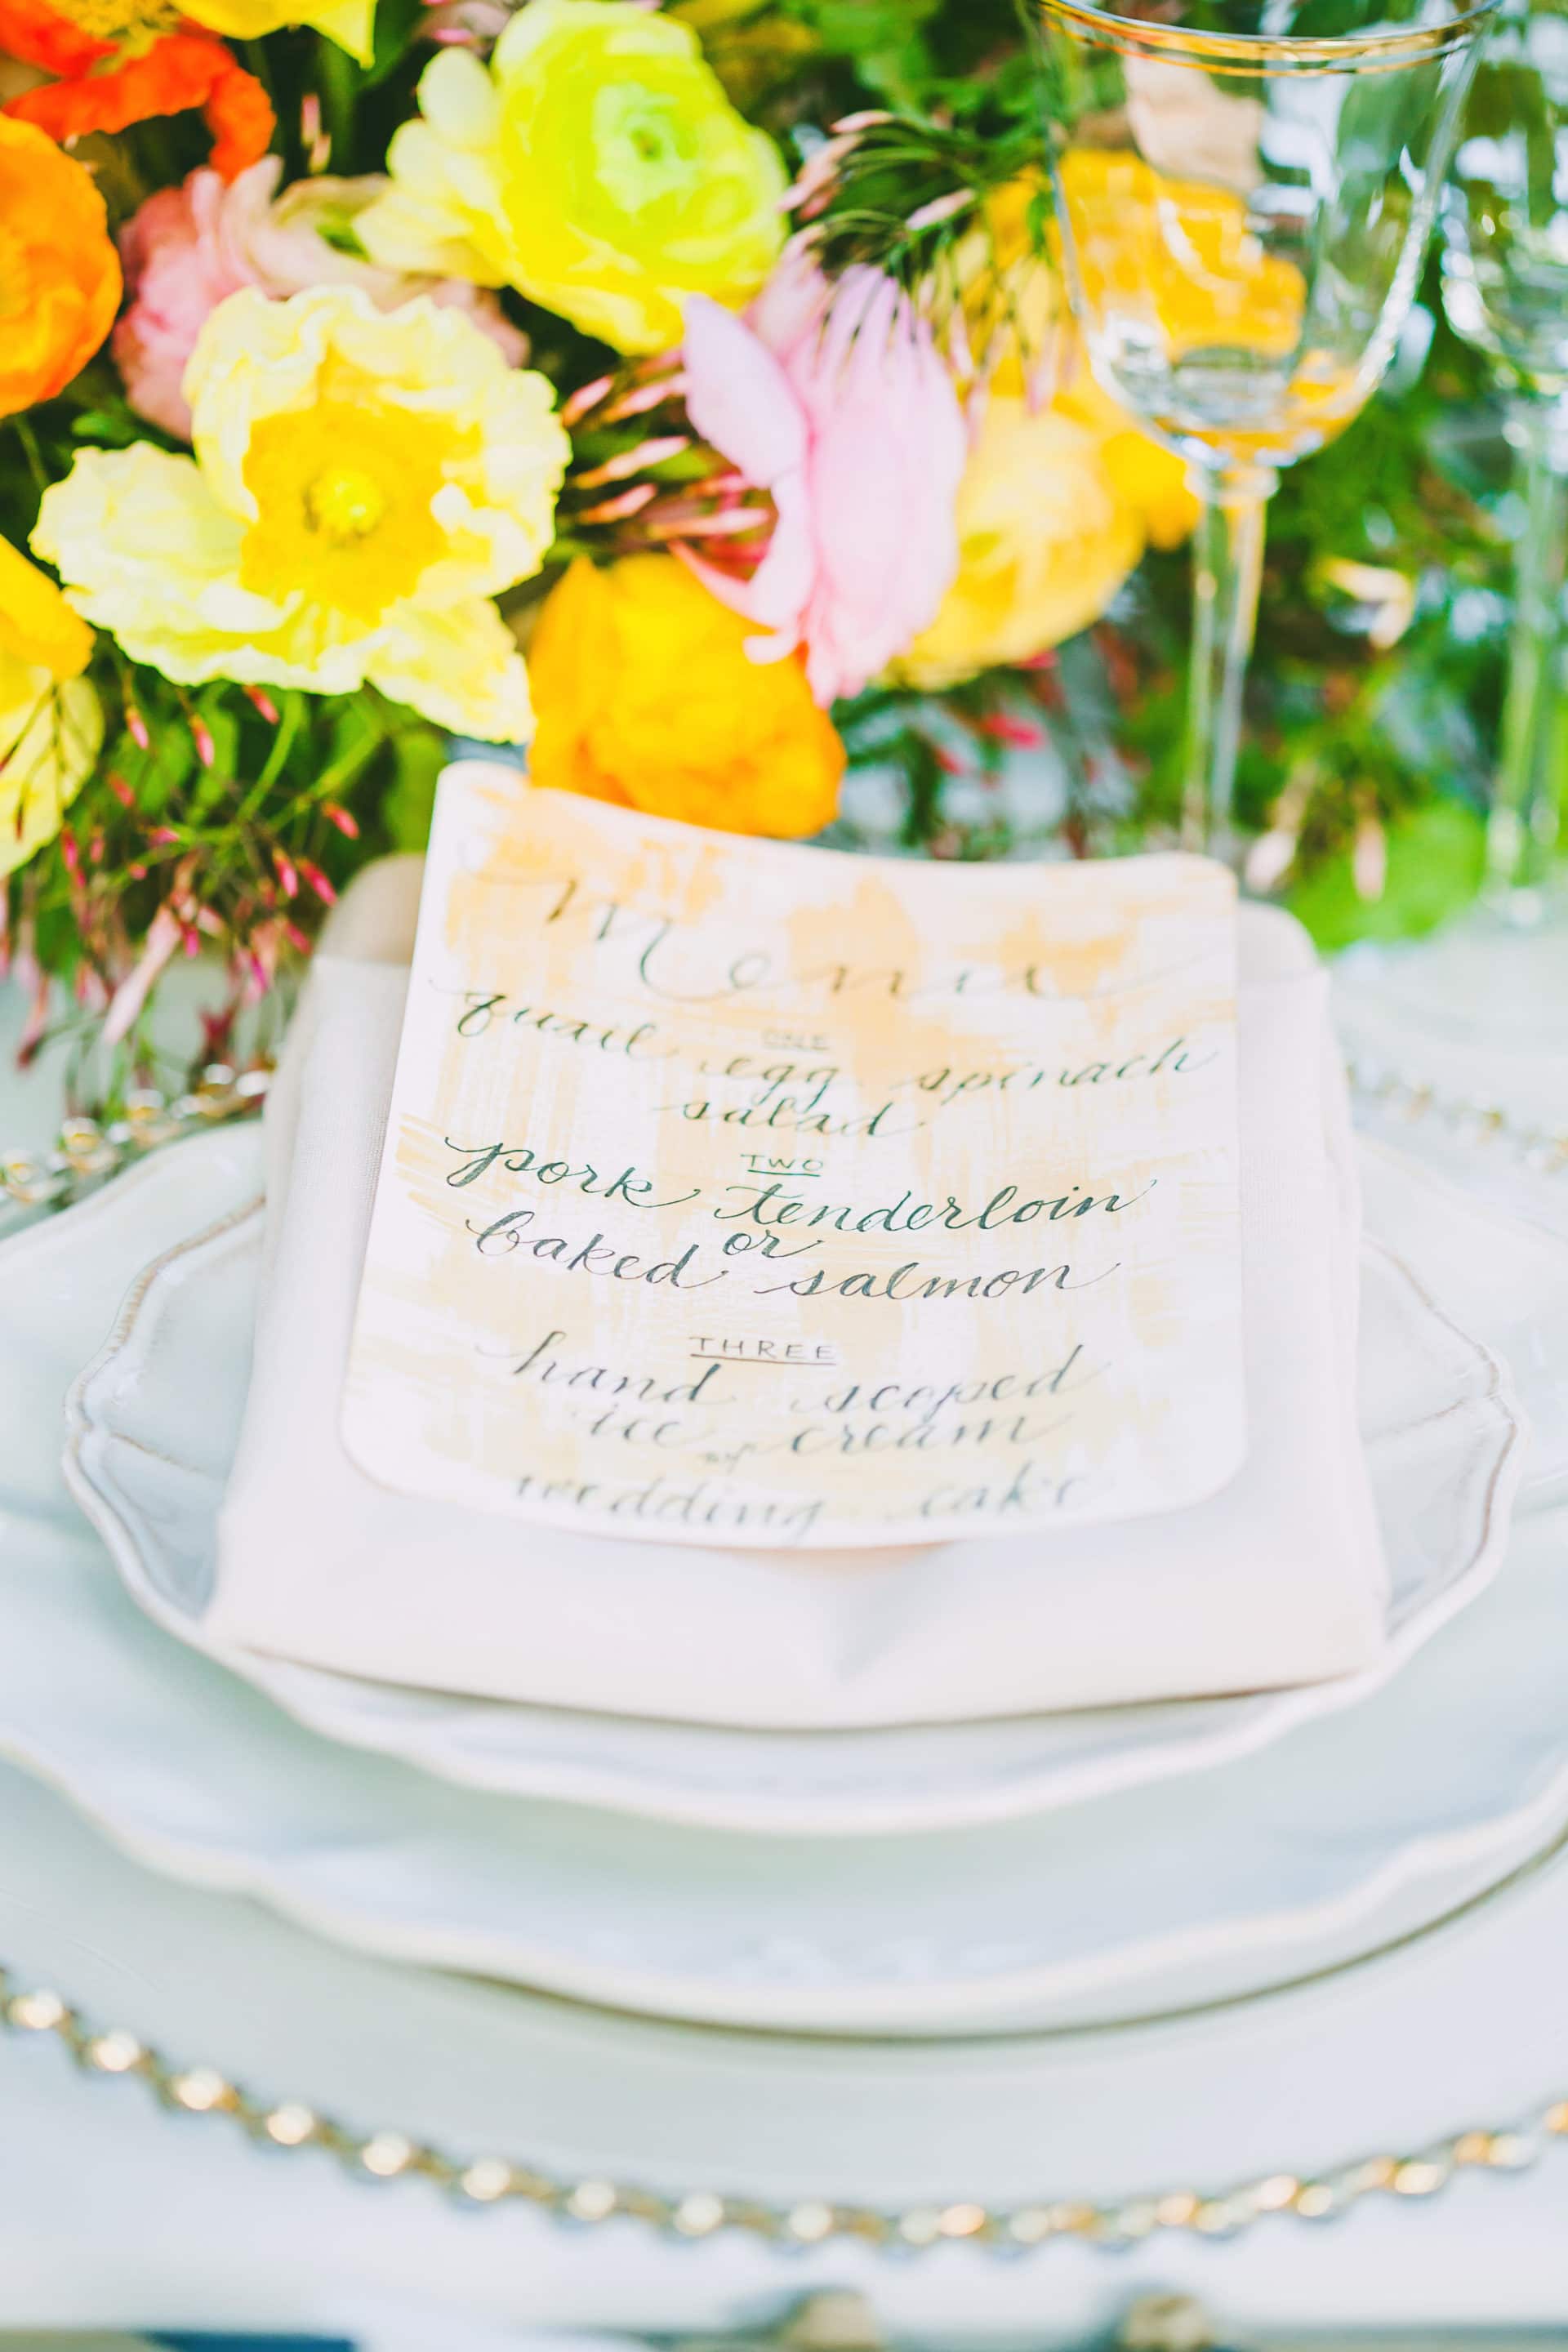 A beautiful table arrangement, bouquet, place setting and designed menu for a micro wedding.